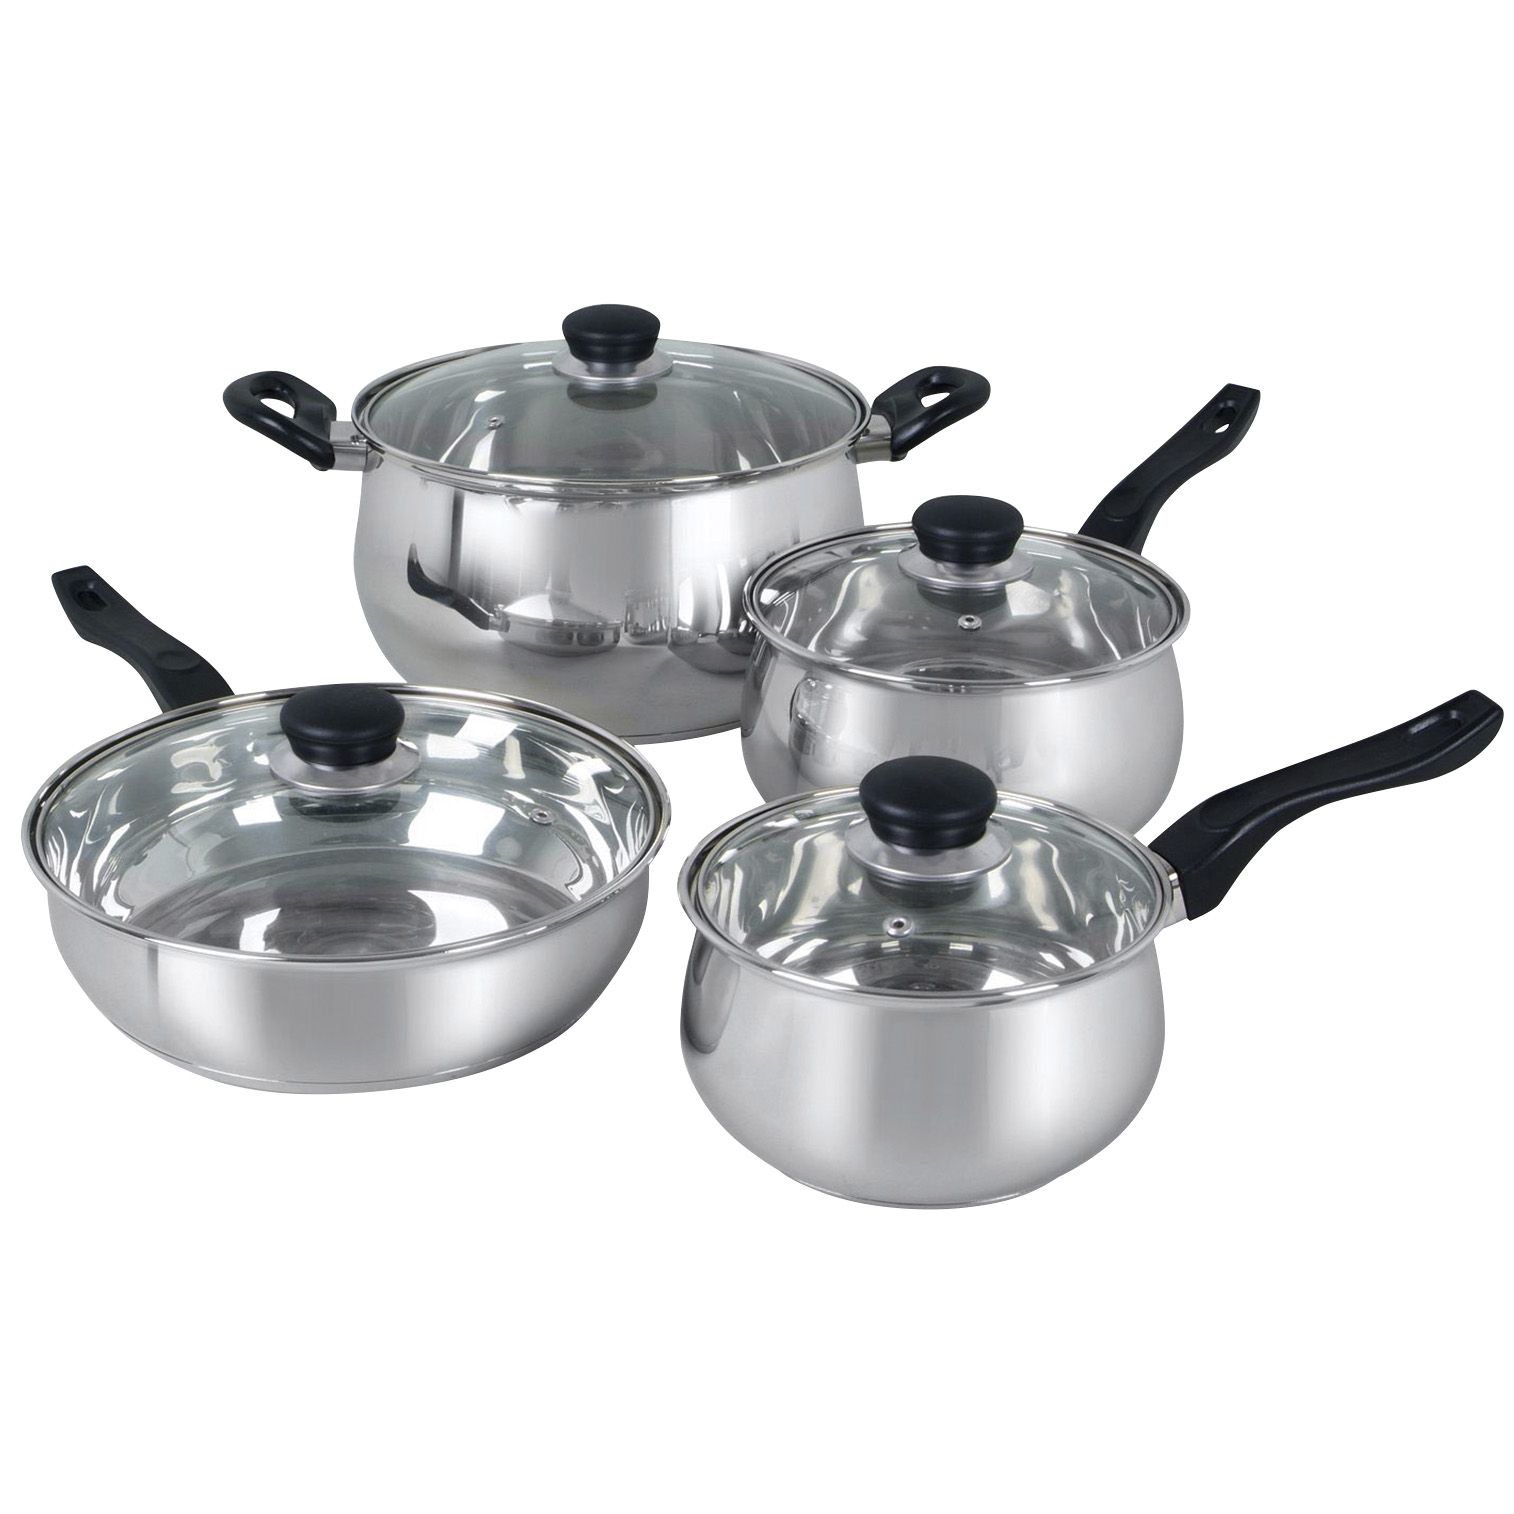 Hastings Home Pots 6-Quart Stainless Steel Stock Pot in the